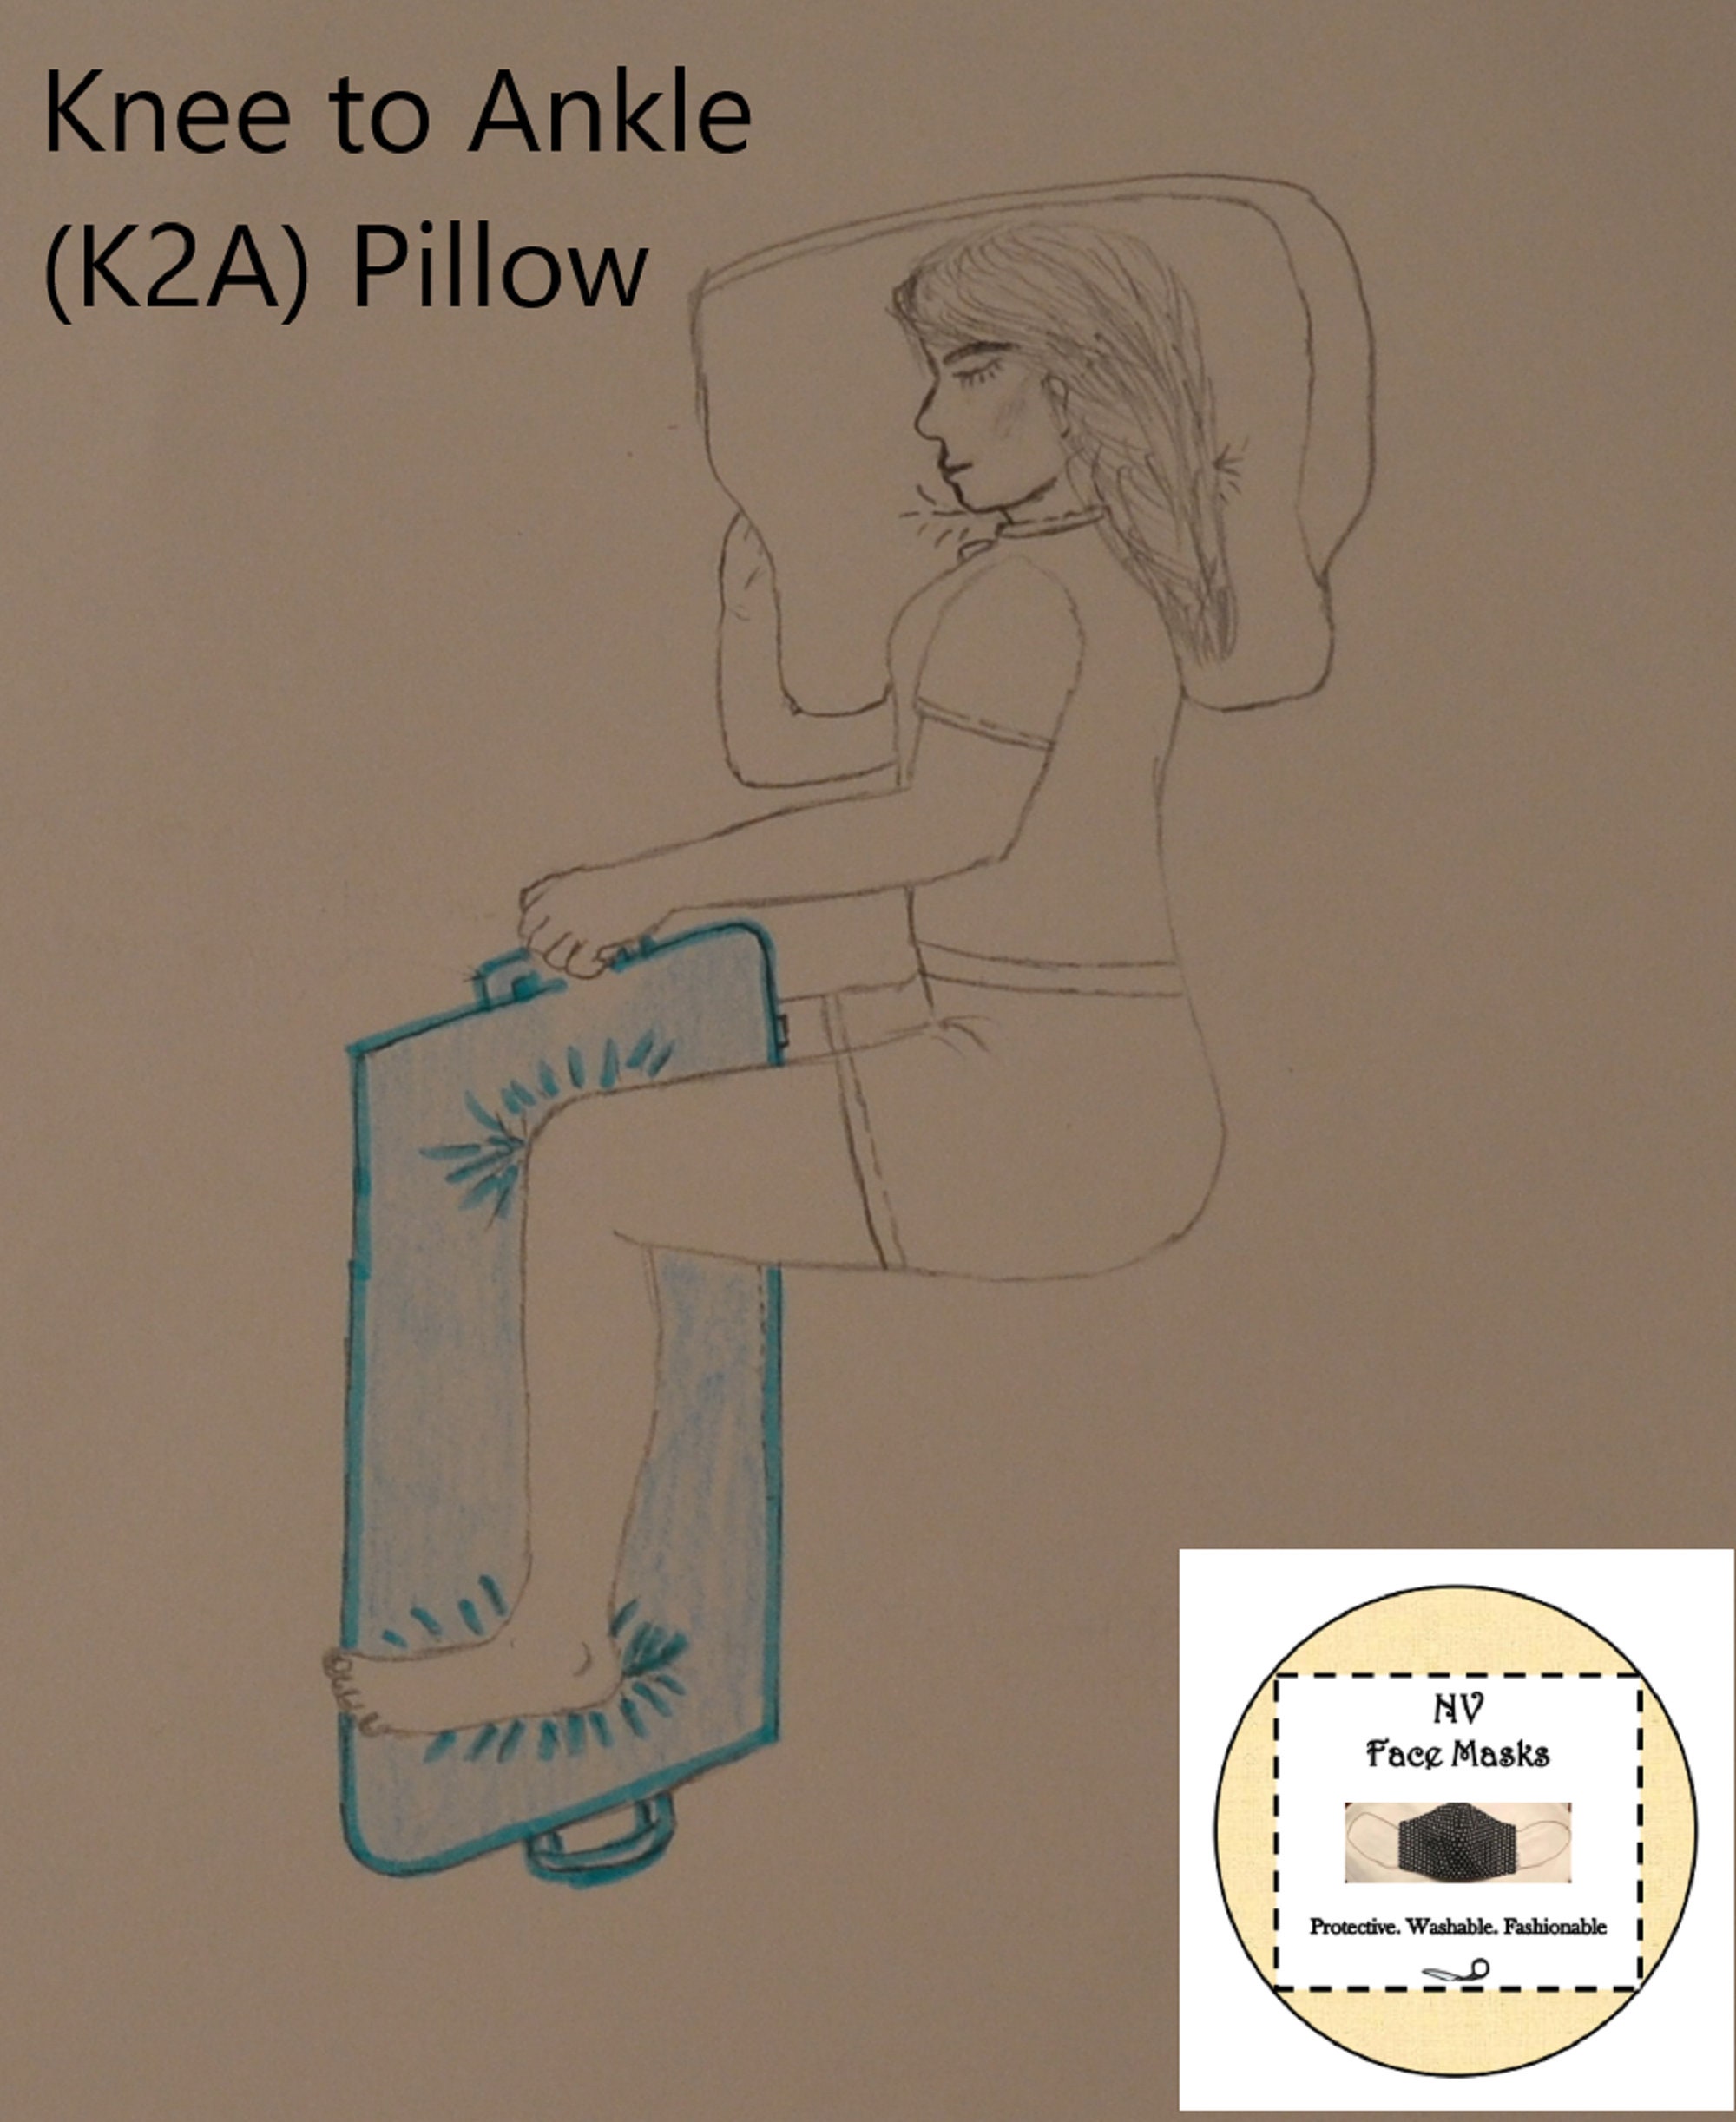 Knee to Ankle K2A Pillow for Side Sleepers, Very Soft Filling